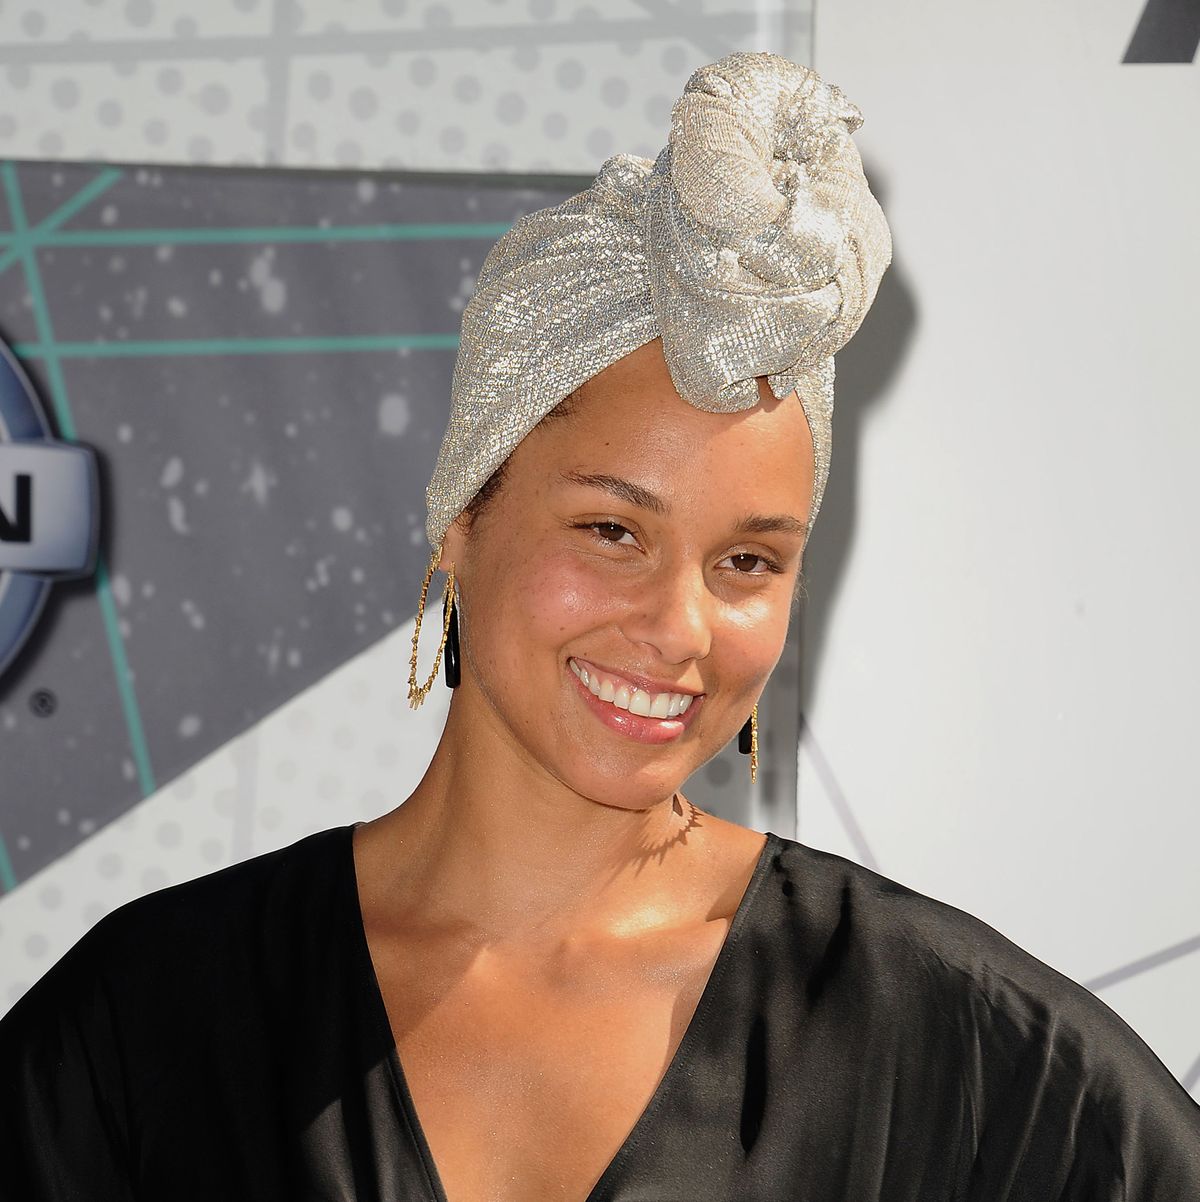 So It Turns Out Alicia Keys Actually *Does* Use Products Her No-Makeup